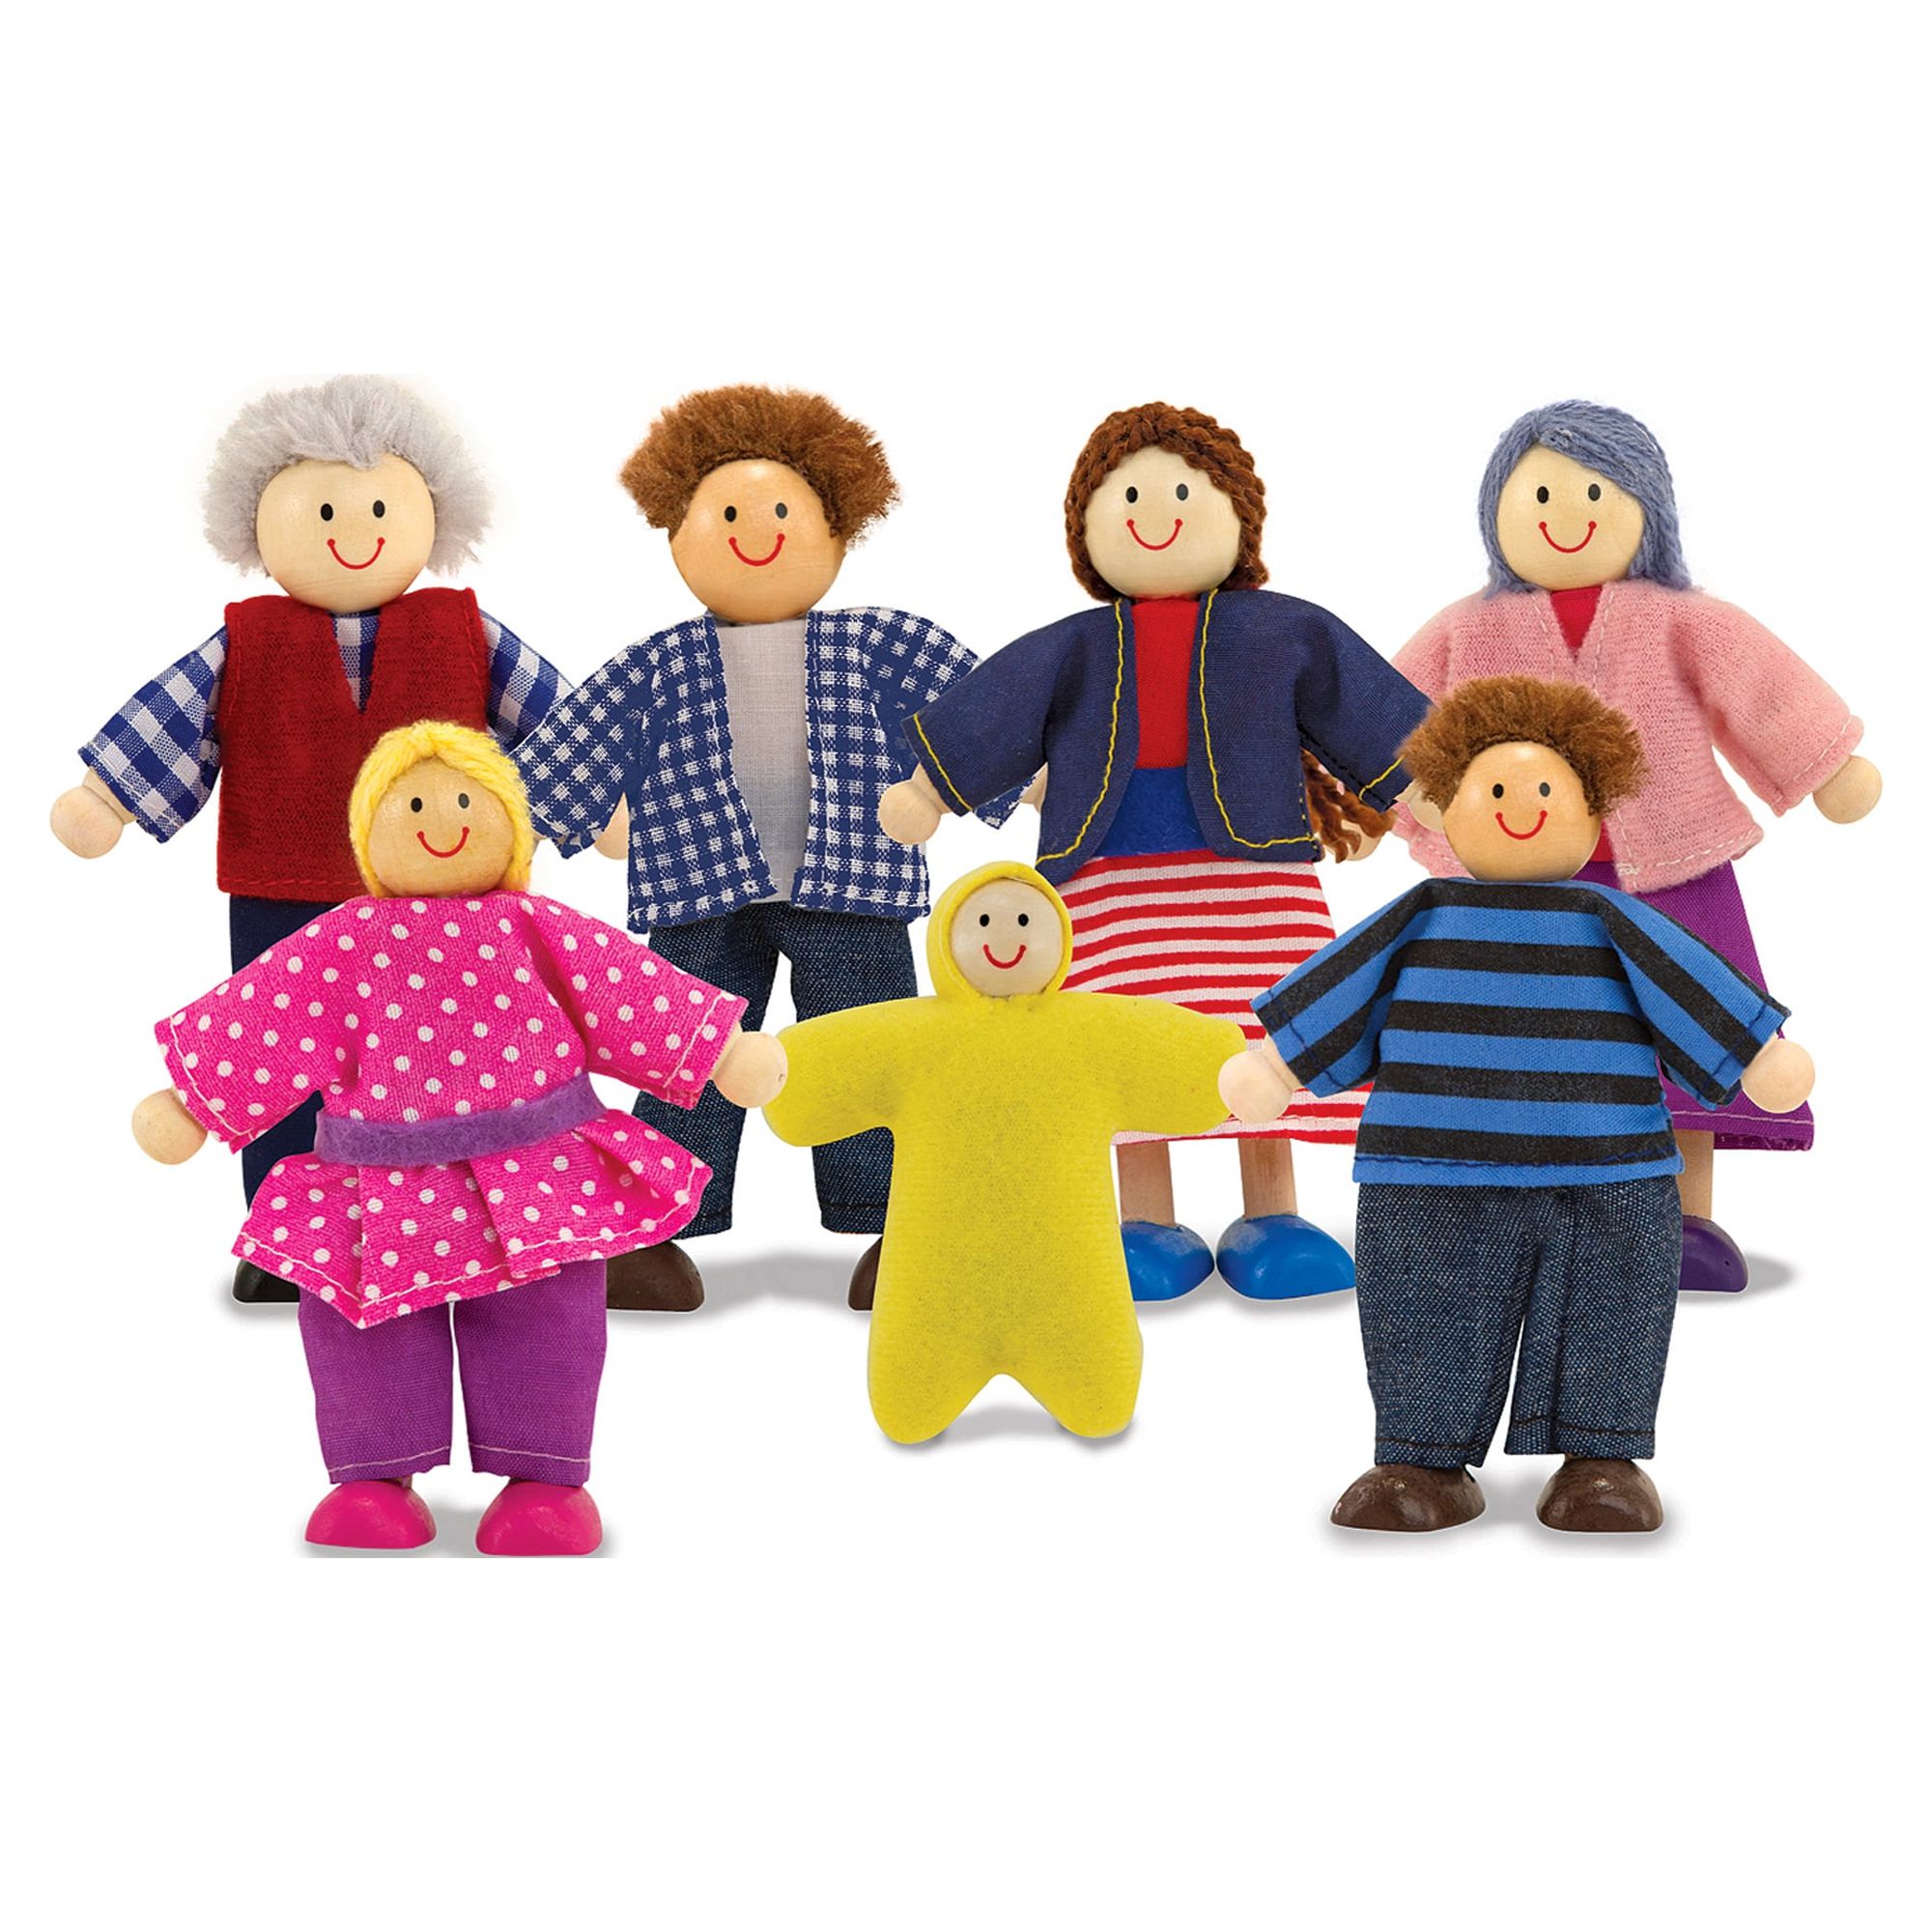 Melissa & Doug 7-Piece Poseable Wooden Doll Family for Dollhouse (2-4 inches each) - image 1 of 9